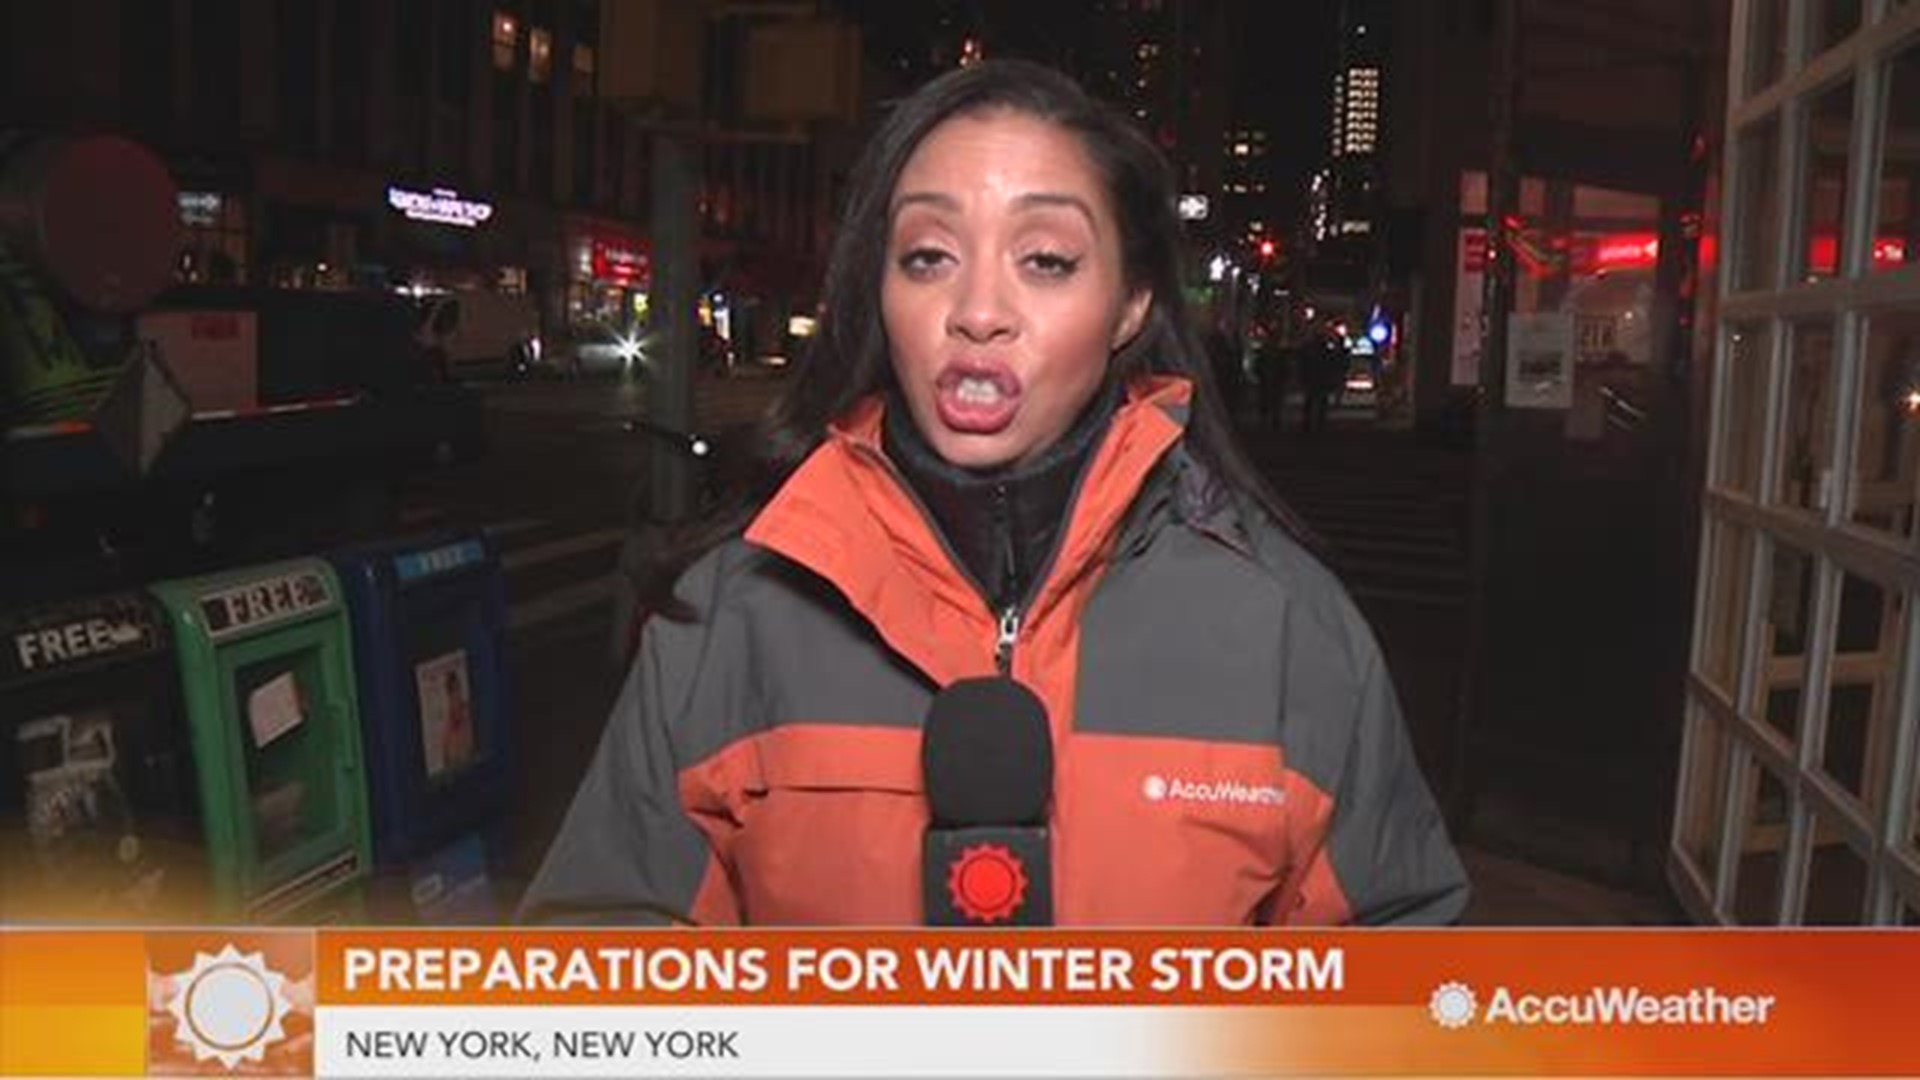 New York City Emergency officials bring in extra crews to clear away snow and ice expected to come during the weekend.